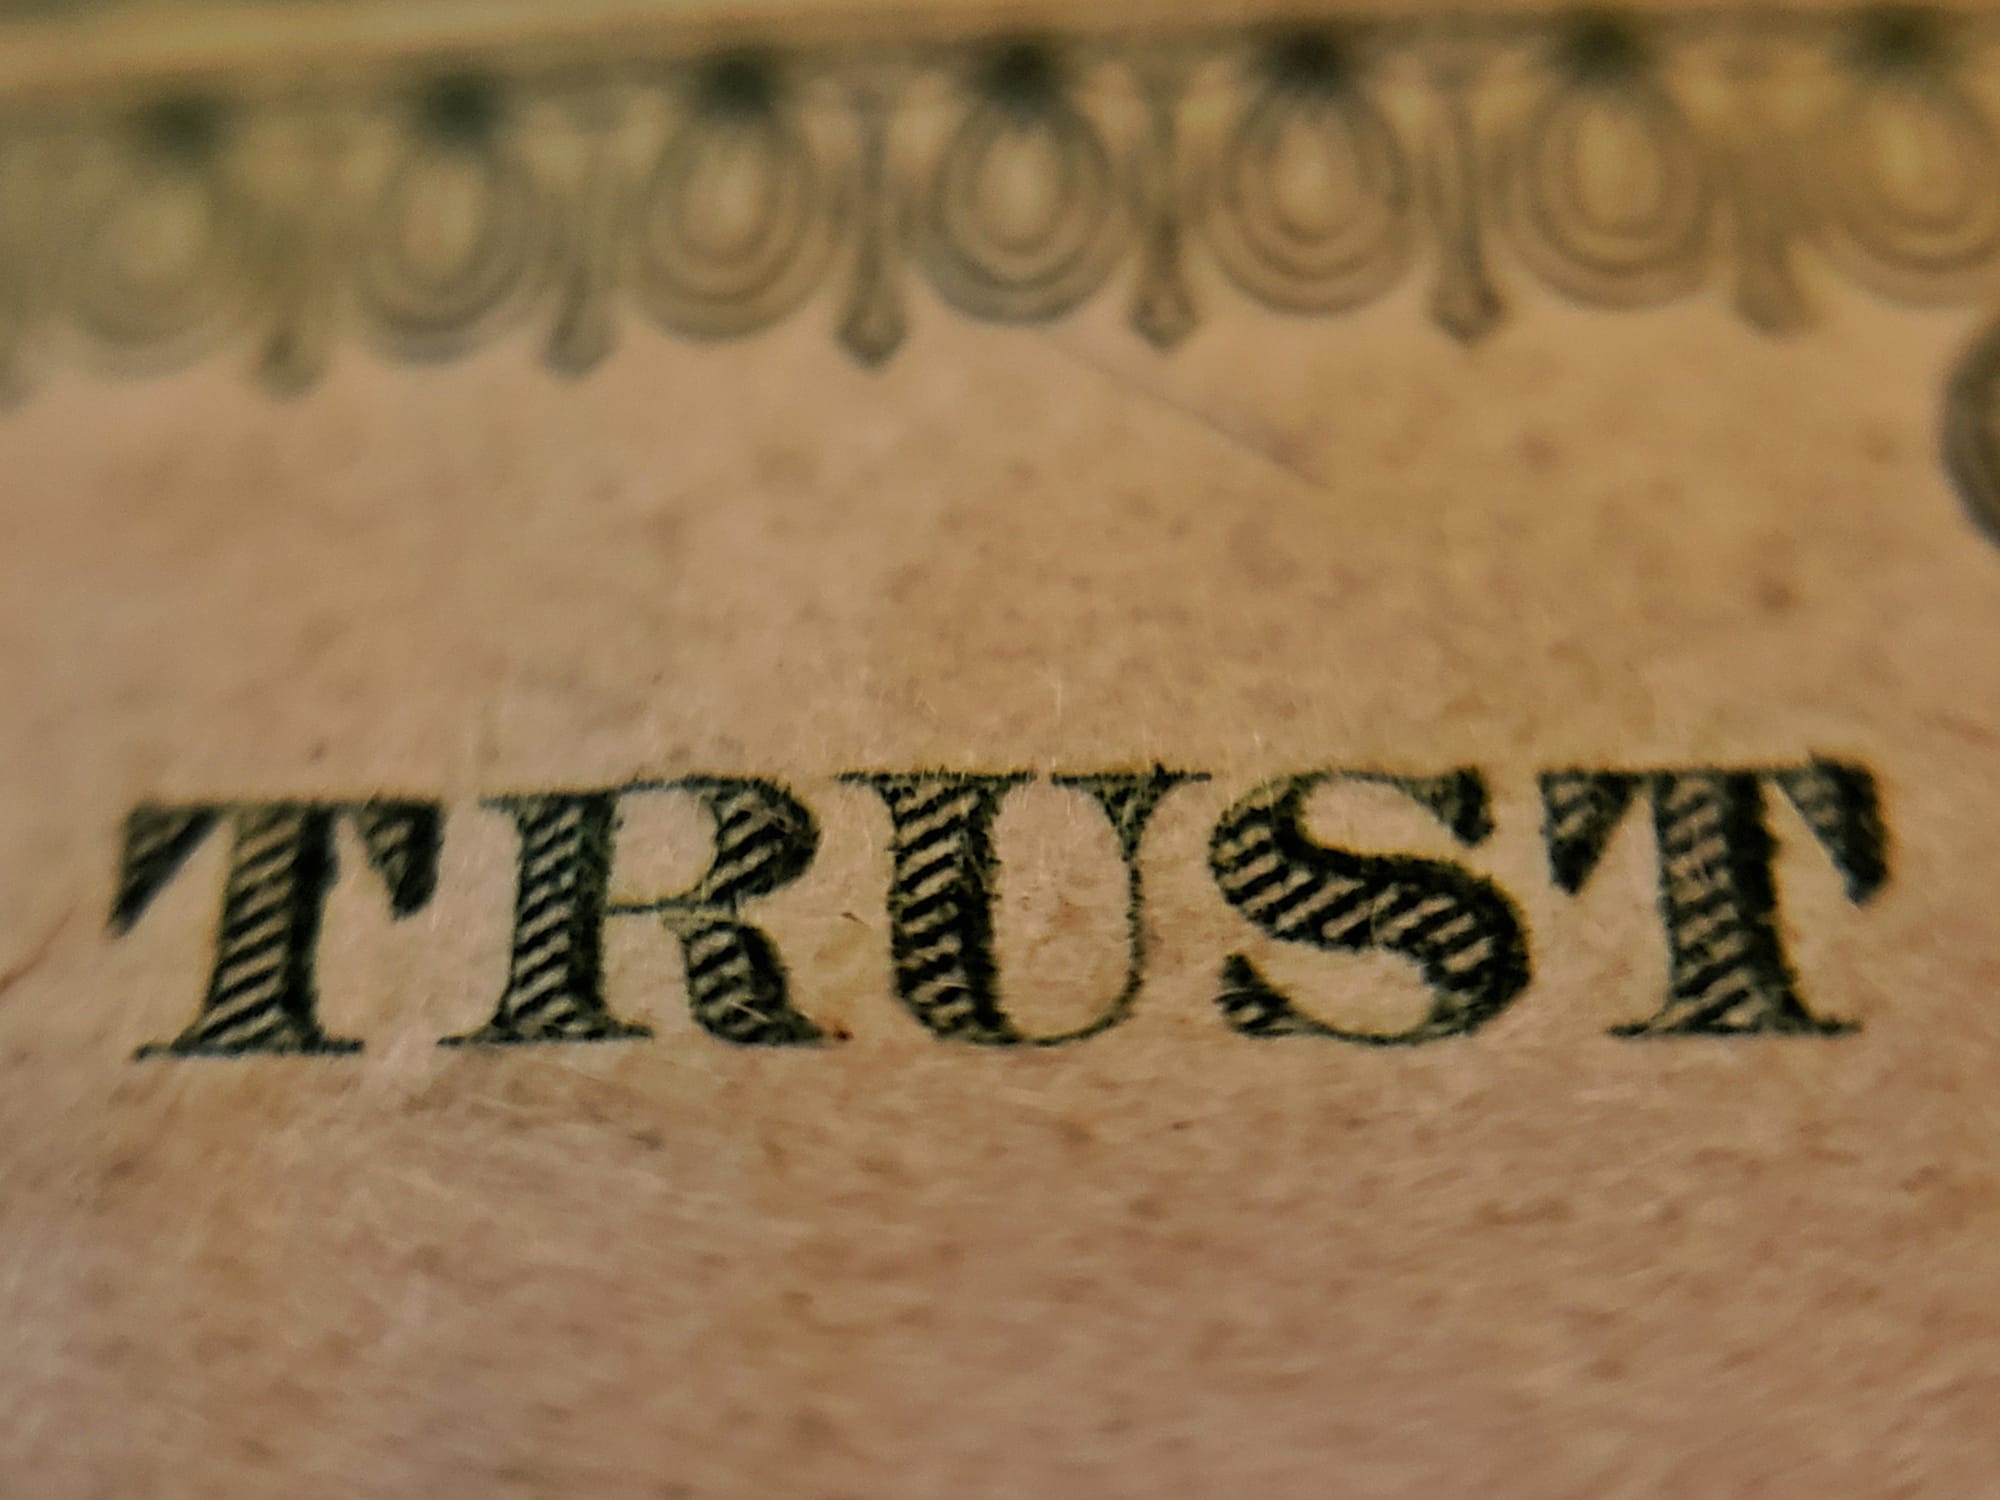 Who Can Consumers Trust?